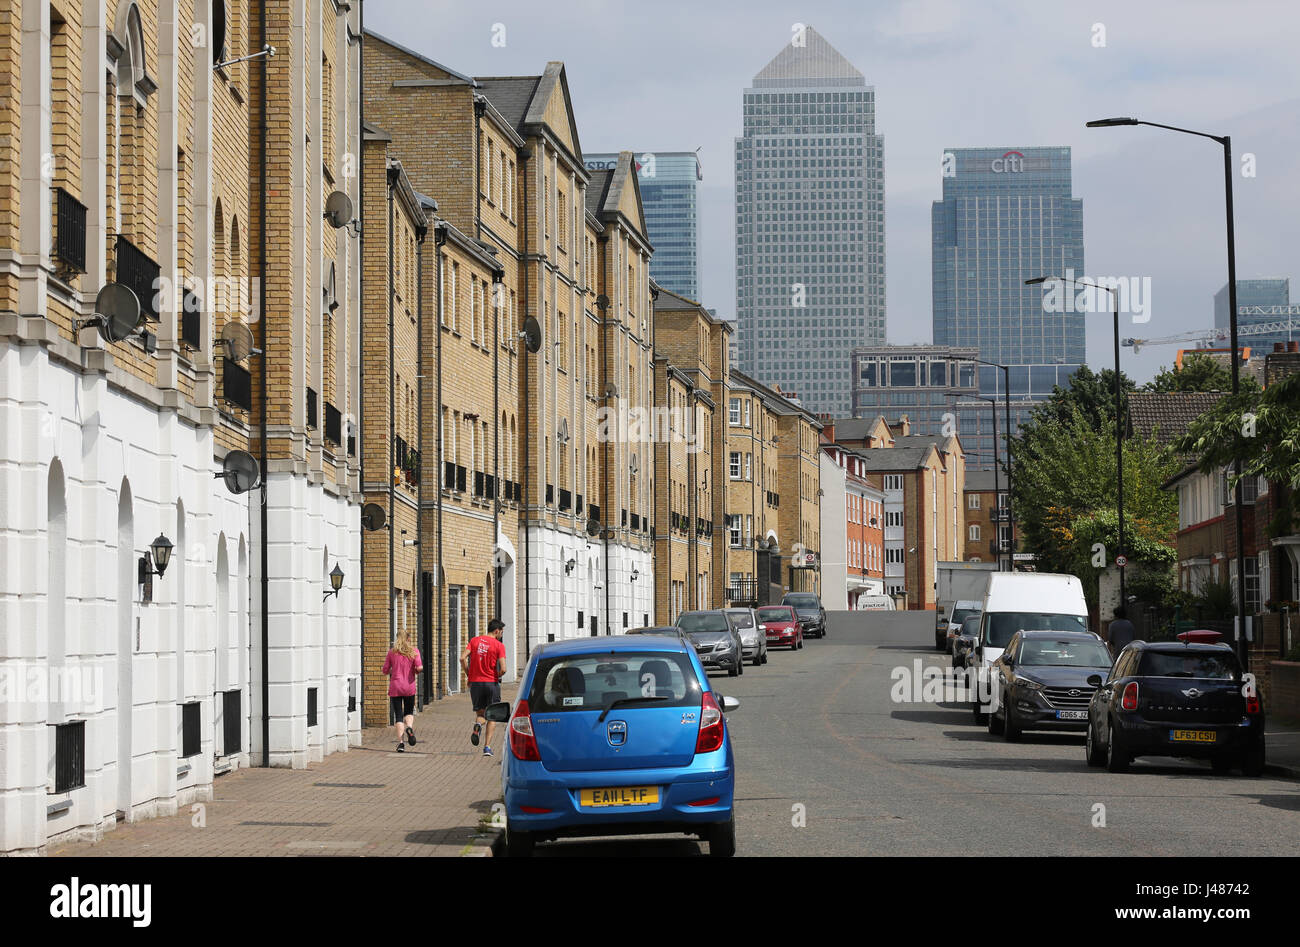 View along Rotherhithe Street in Southeast London, a residential street with the towers of Canary Wharf in the background. Shows couple jogging. Stock Photo